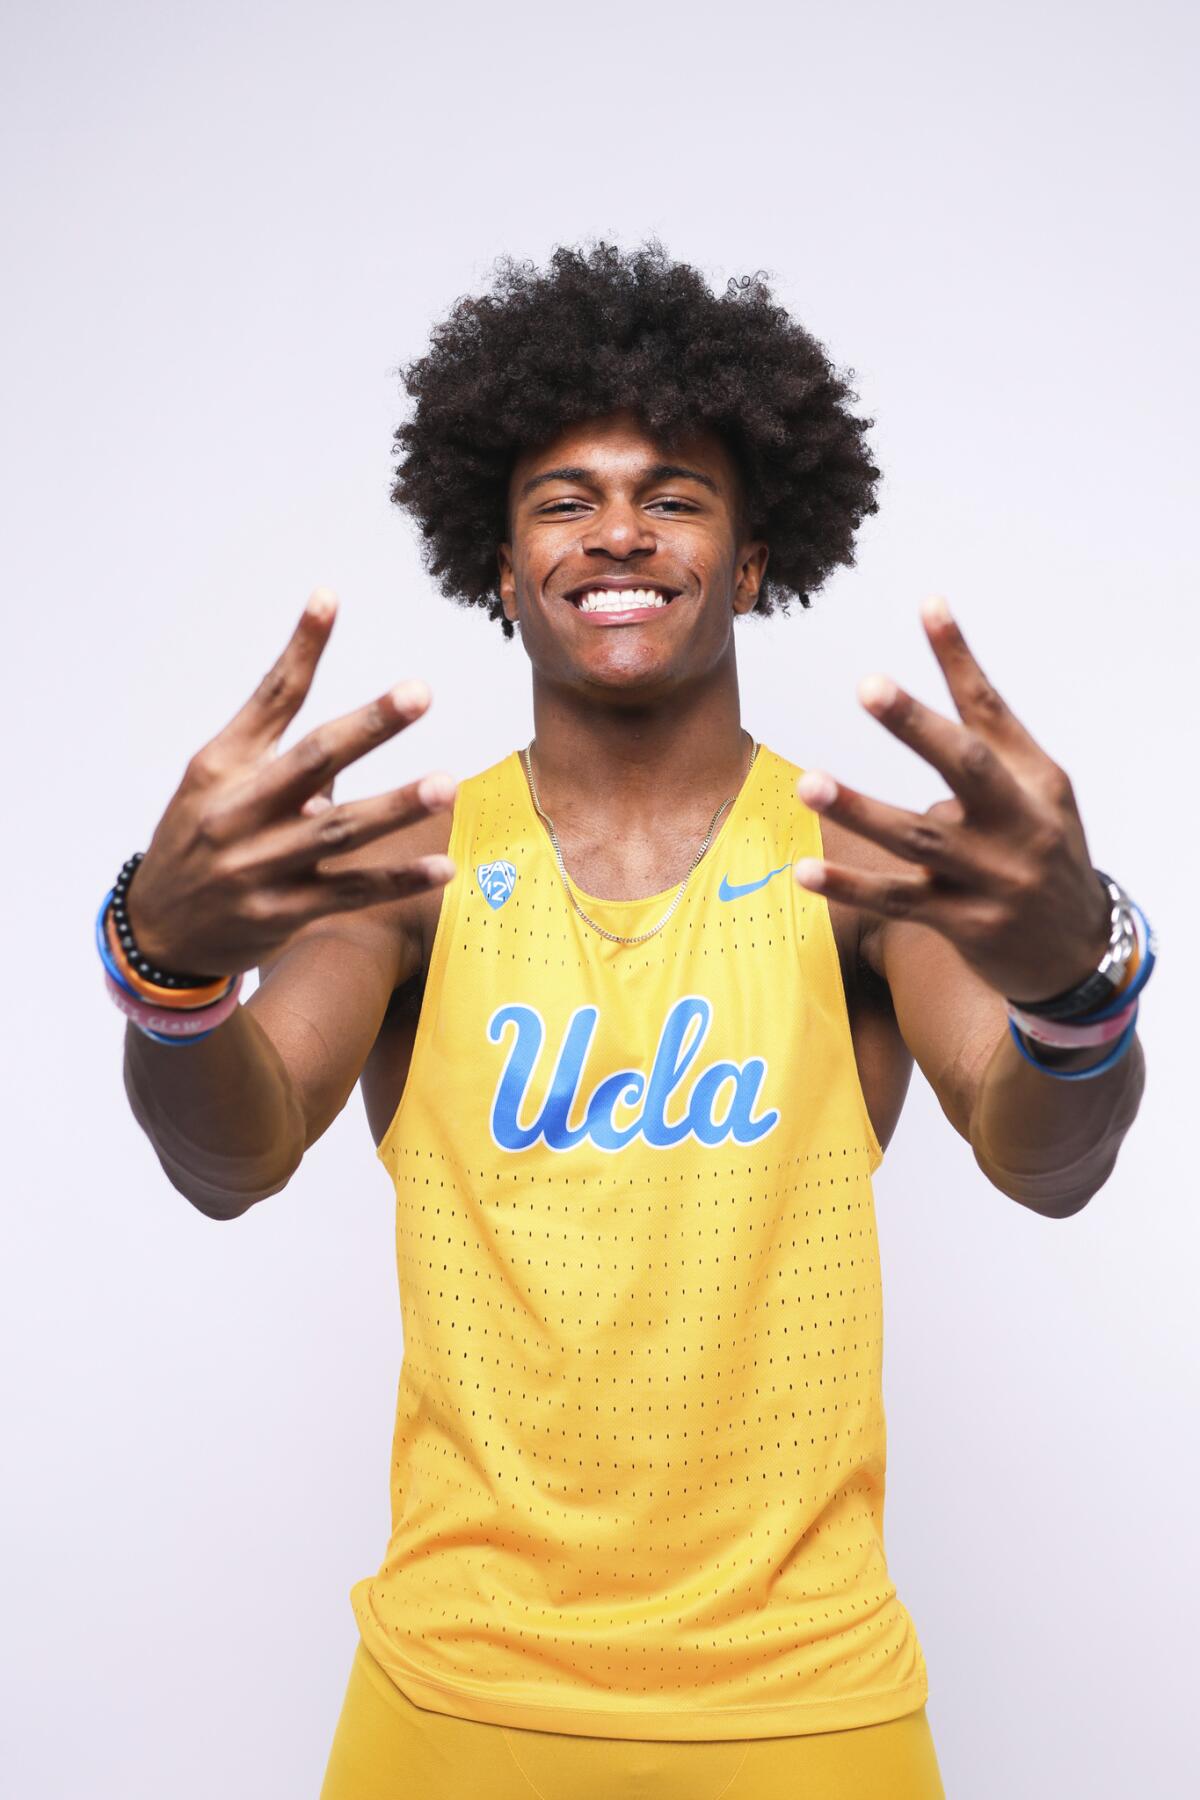 Karson Gordon from Texas will be playing quarterback and triple jumping for UCLA.